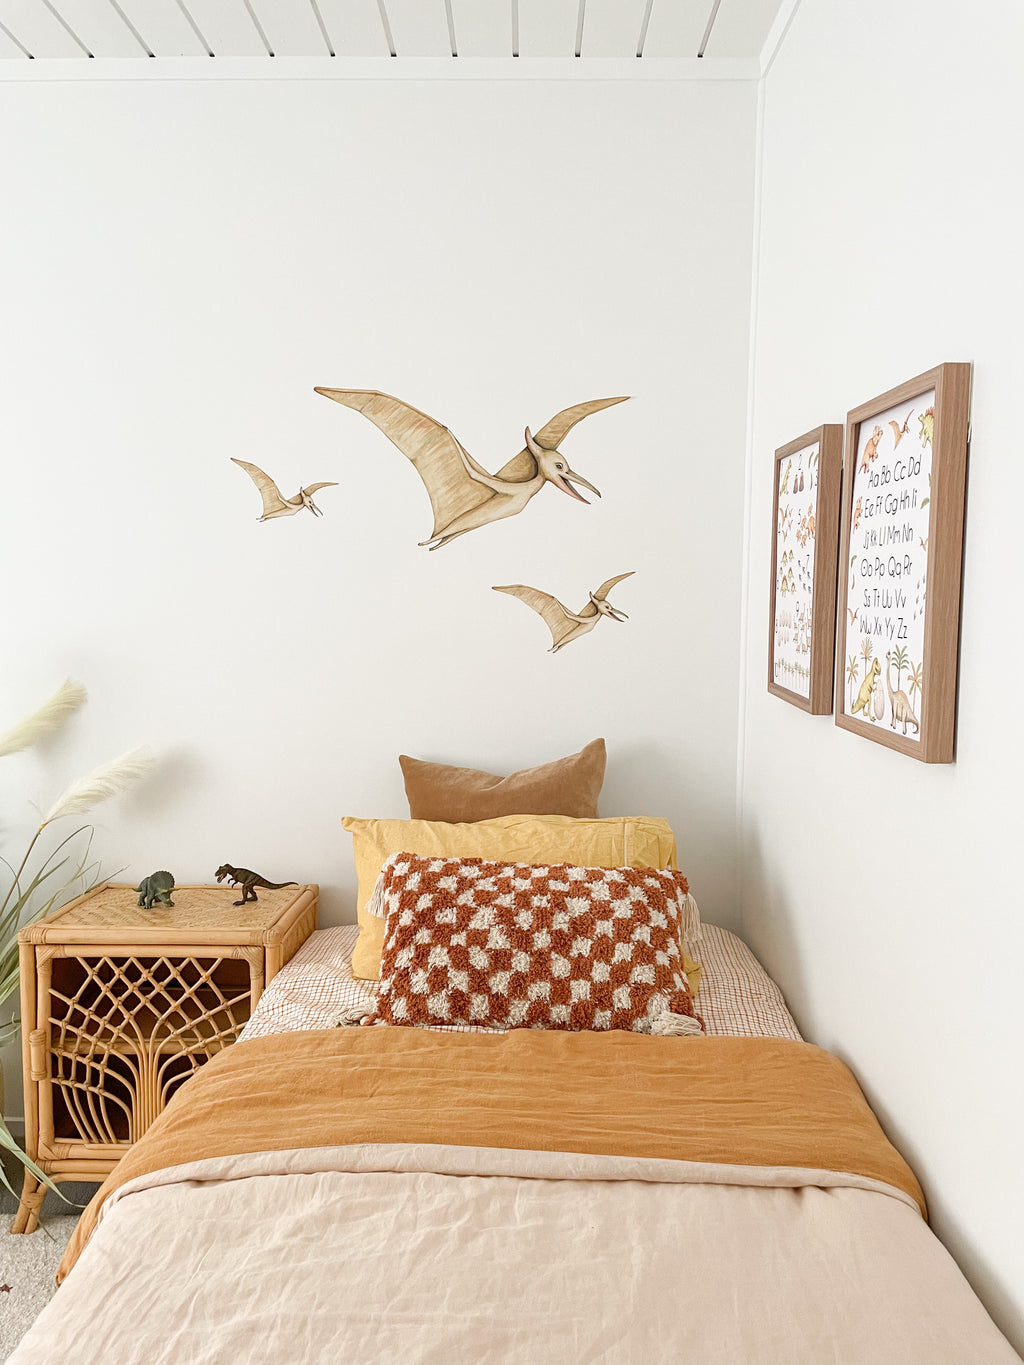 Pterodactyl Wall Stickers